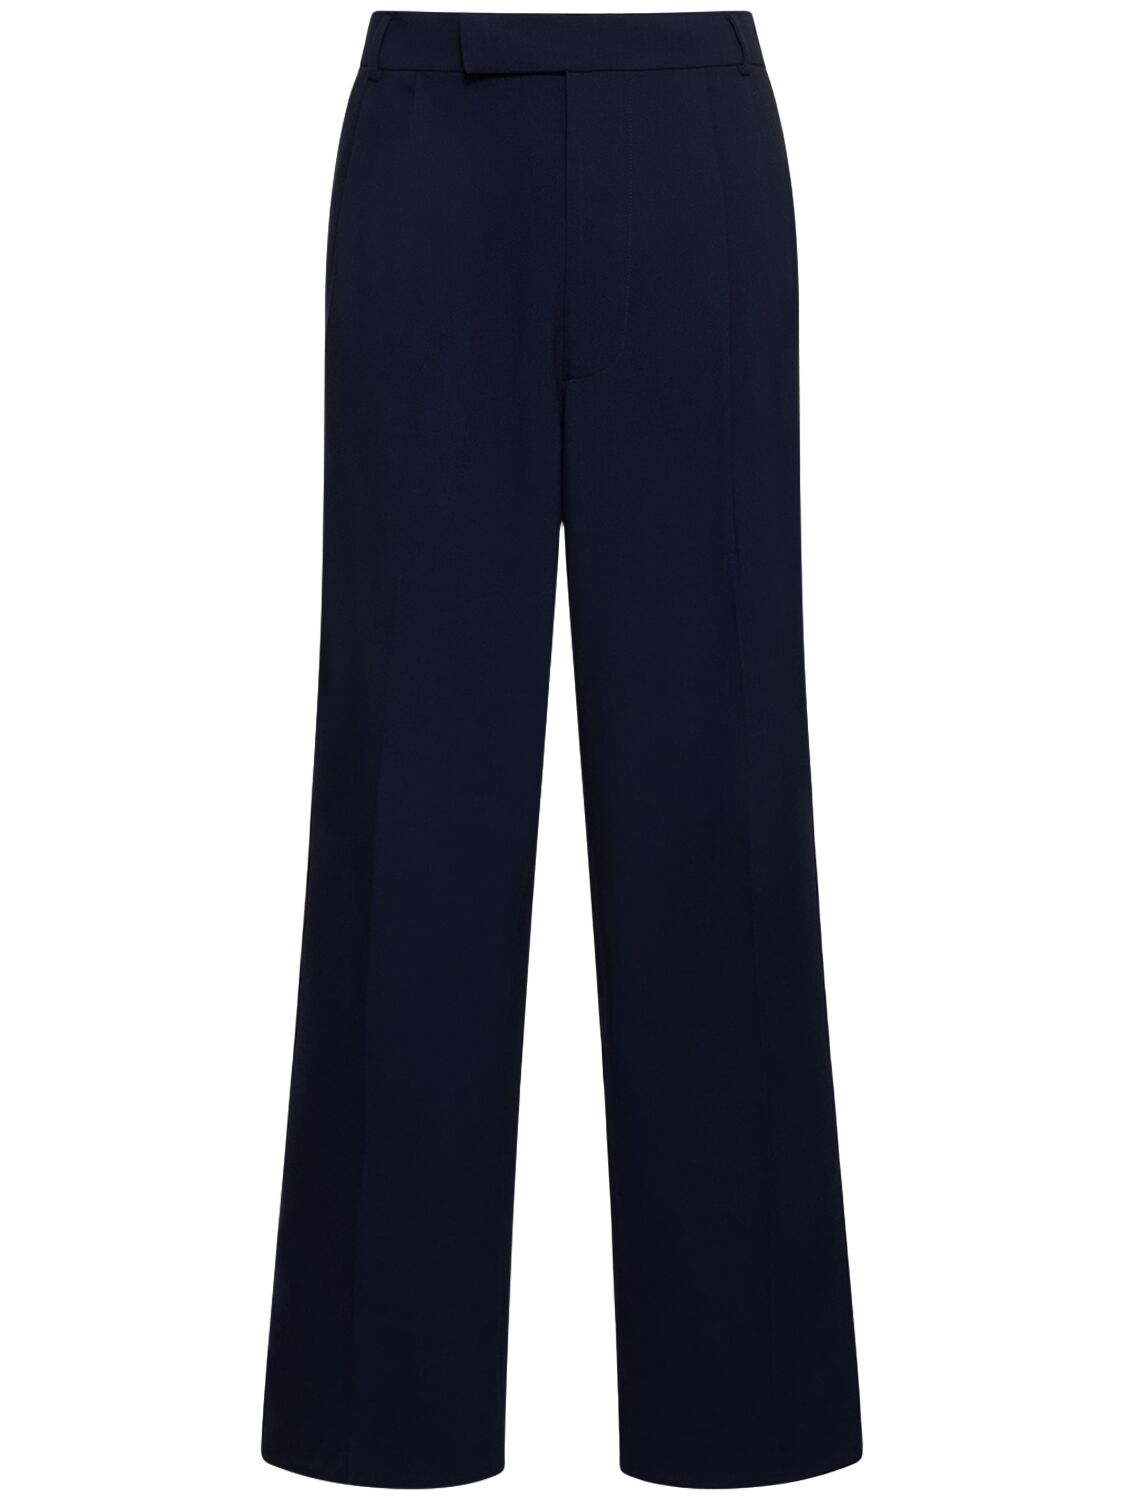 Image of Beo Midweight Light Stretch Suit Pants